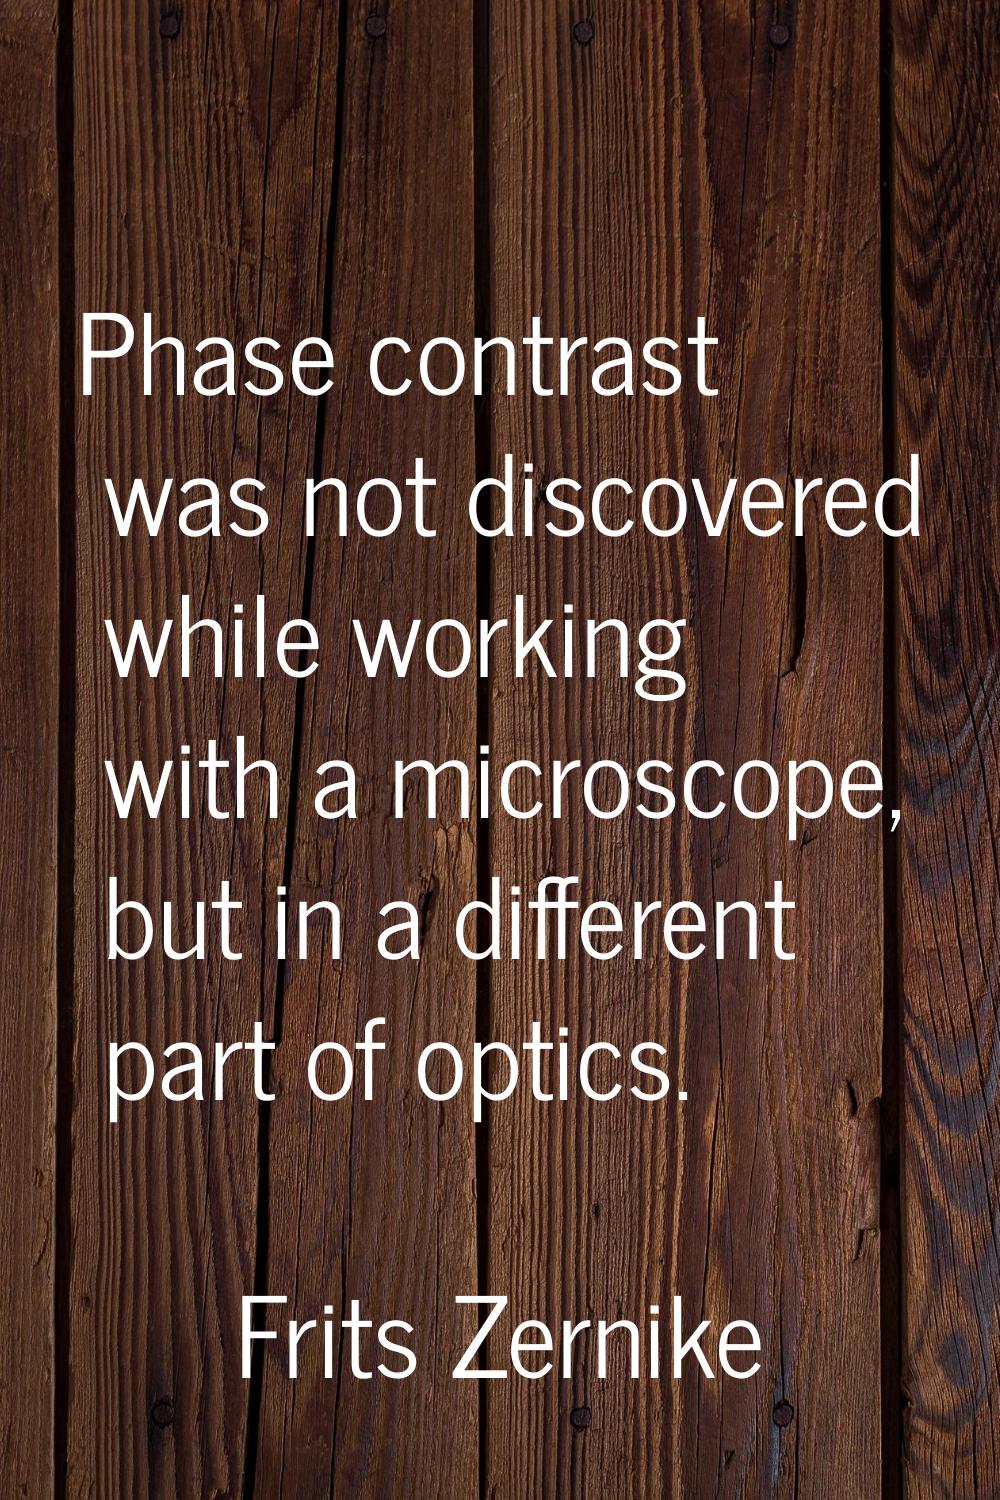 Phase contrast was not discovered while working with a microscope, but in a different part of optic